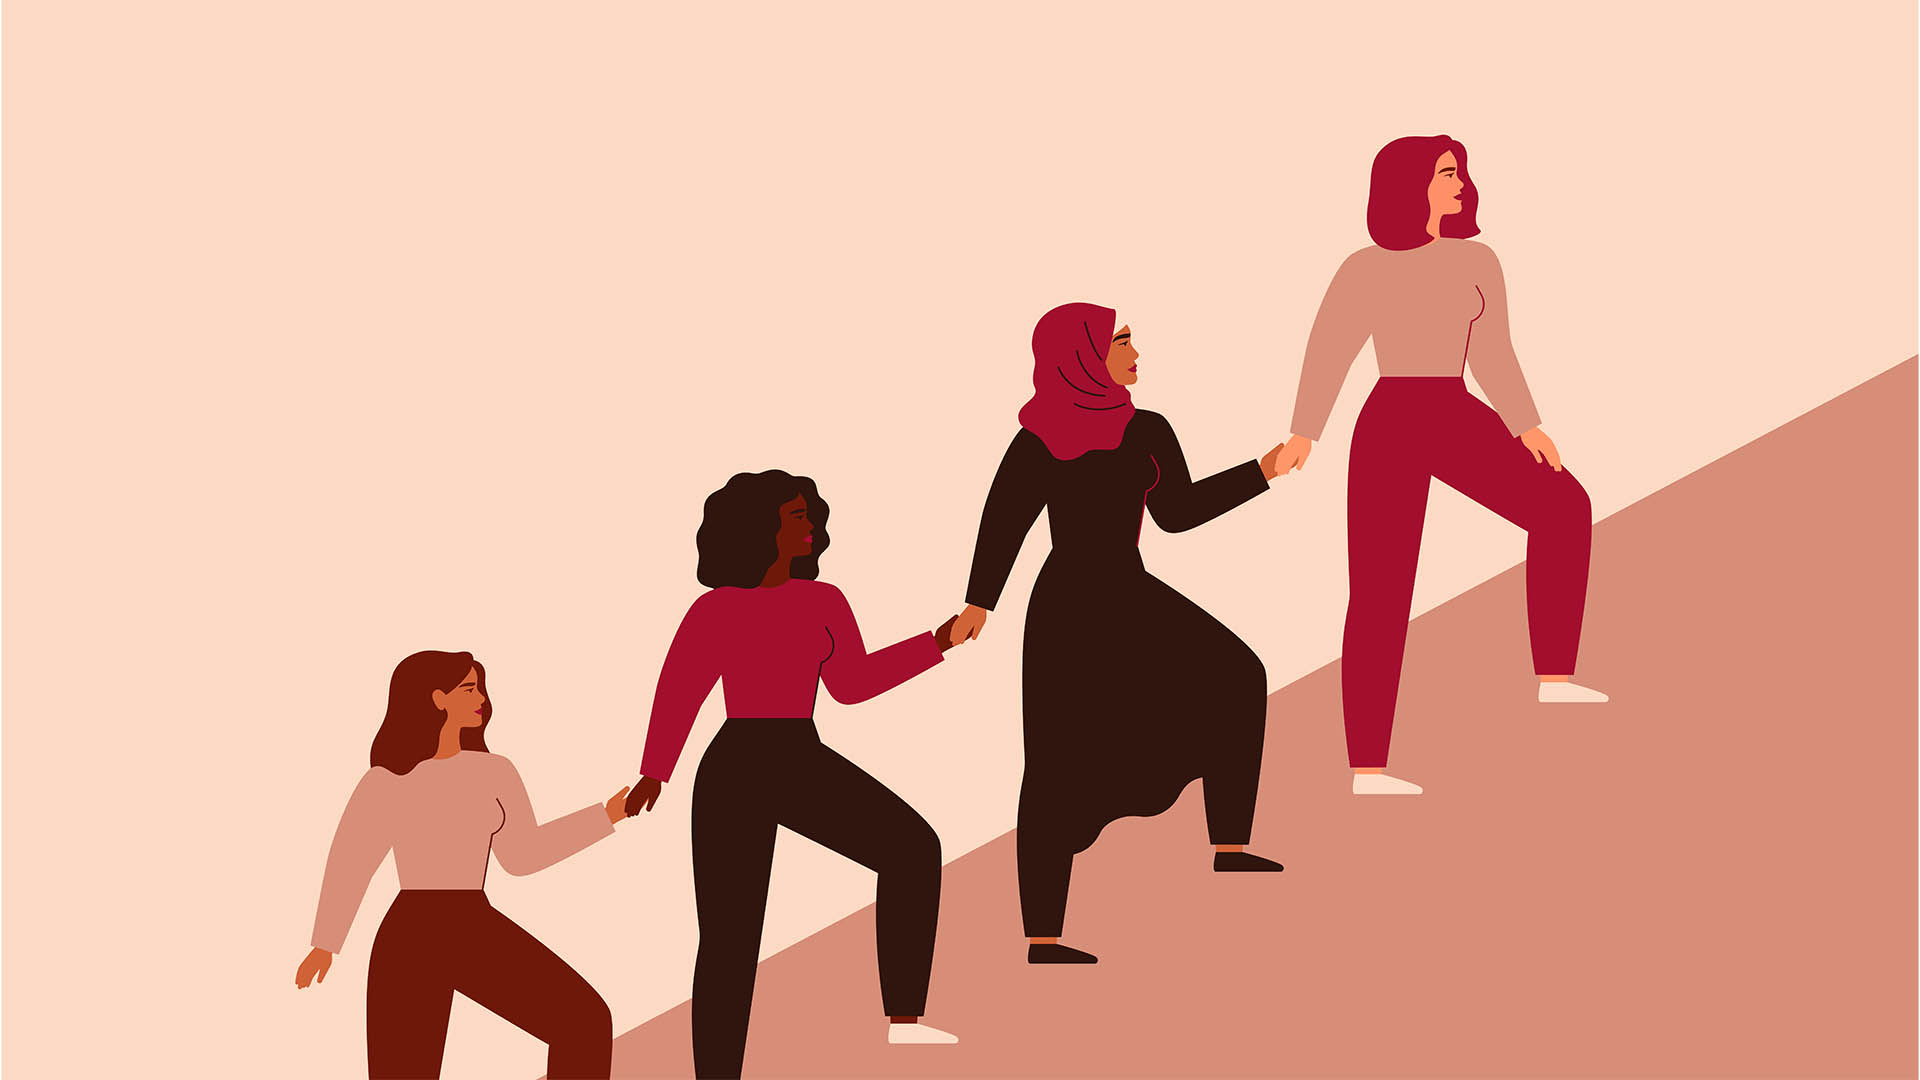 A graphic of some women supporting each other